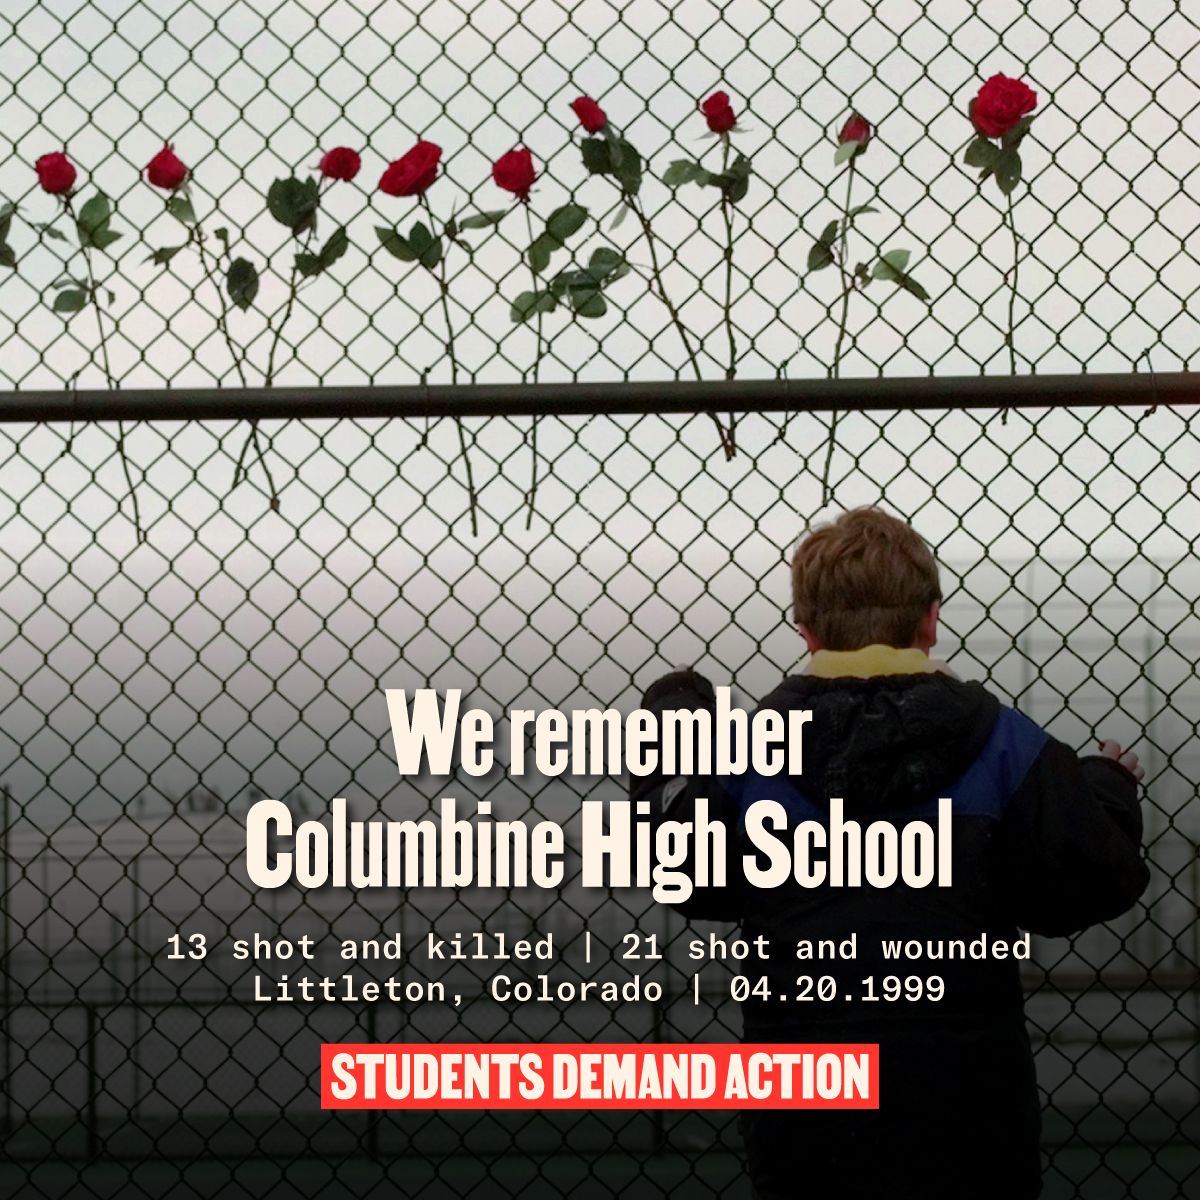 It’s been twenty-five years since two students, armed with assault weapons and high-capacity magazines, shot and killed 13 people and wounded almost twice as many others at Columbine High School.